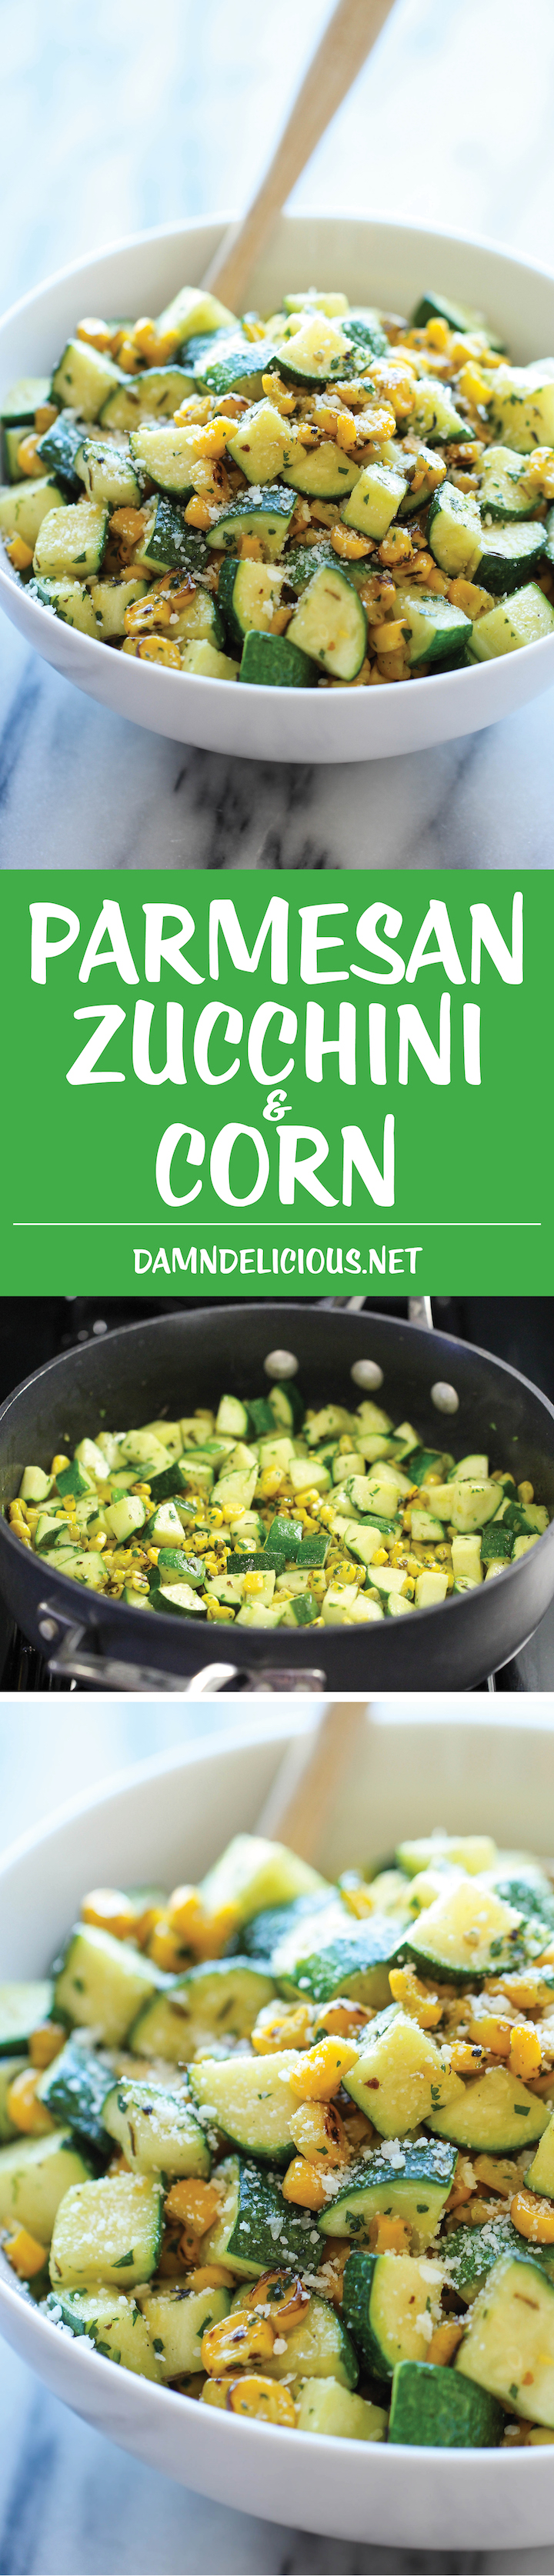 Parmesan Zucchini and Corn - A healthy 10 minute side dish to dress up any meal. It's so simple yet full of flavor!